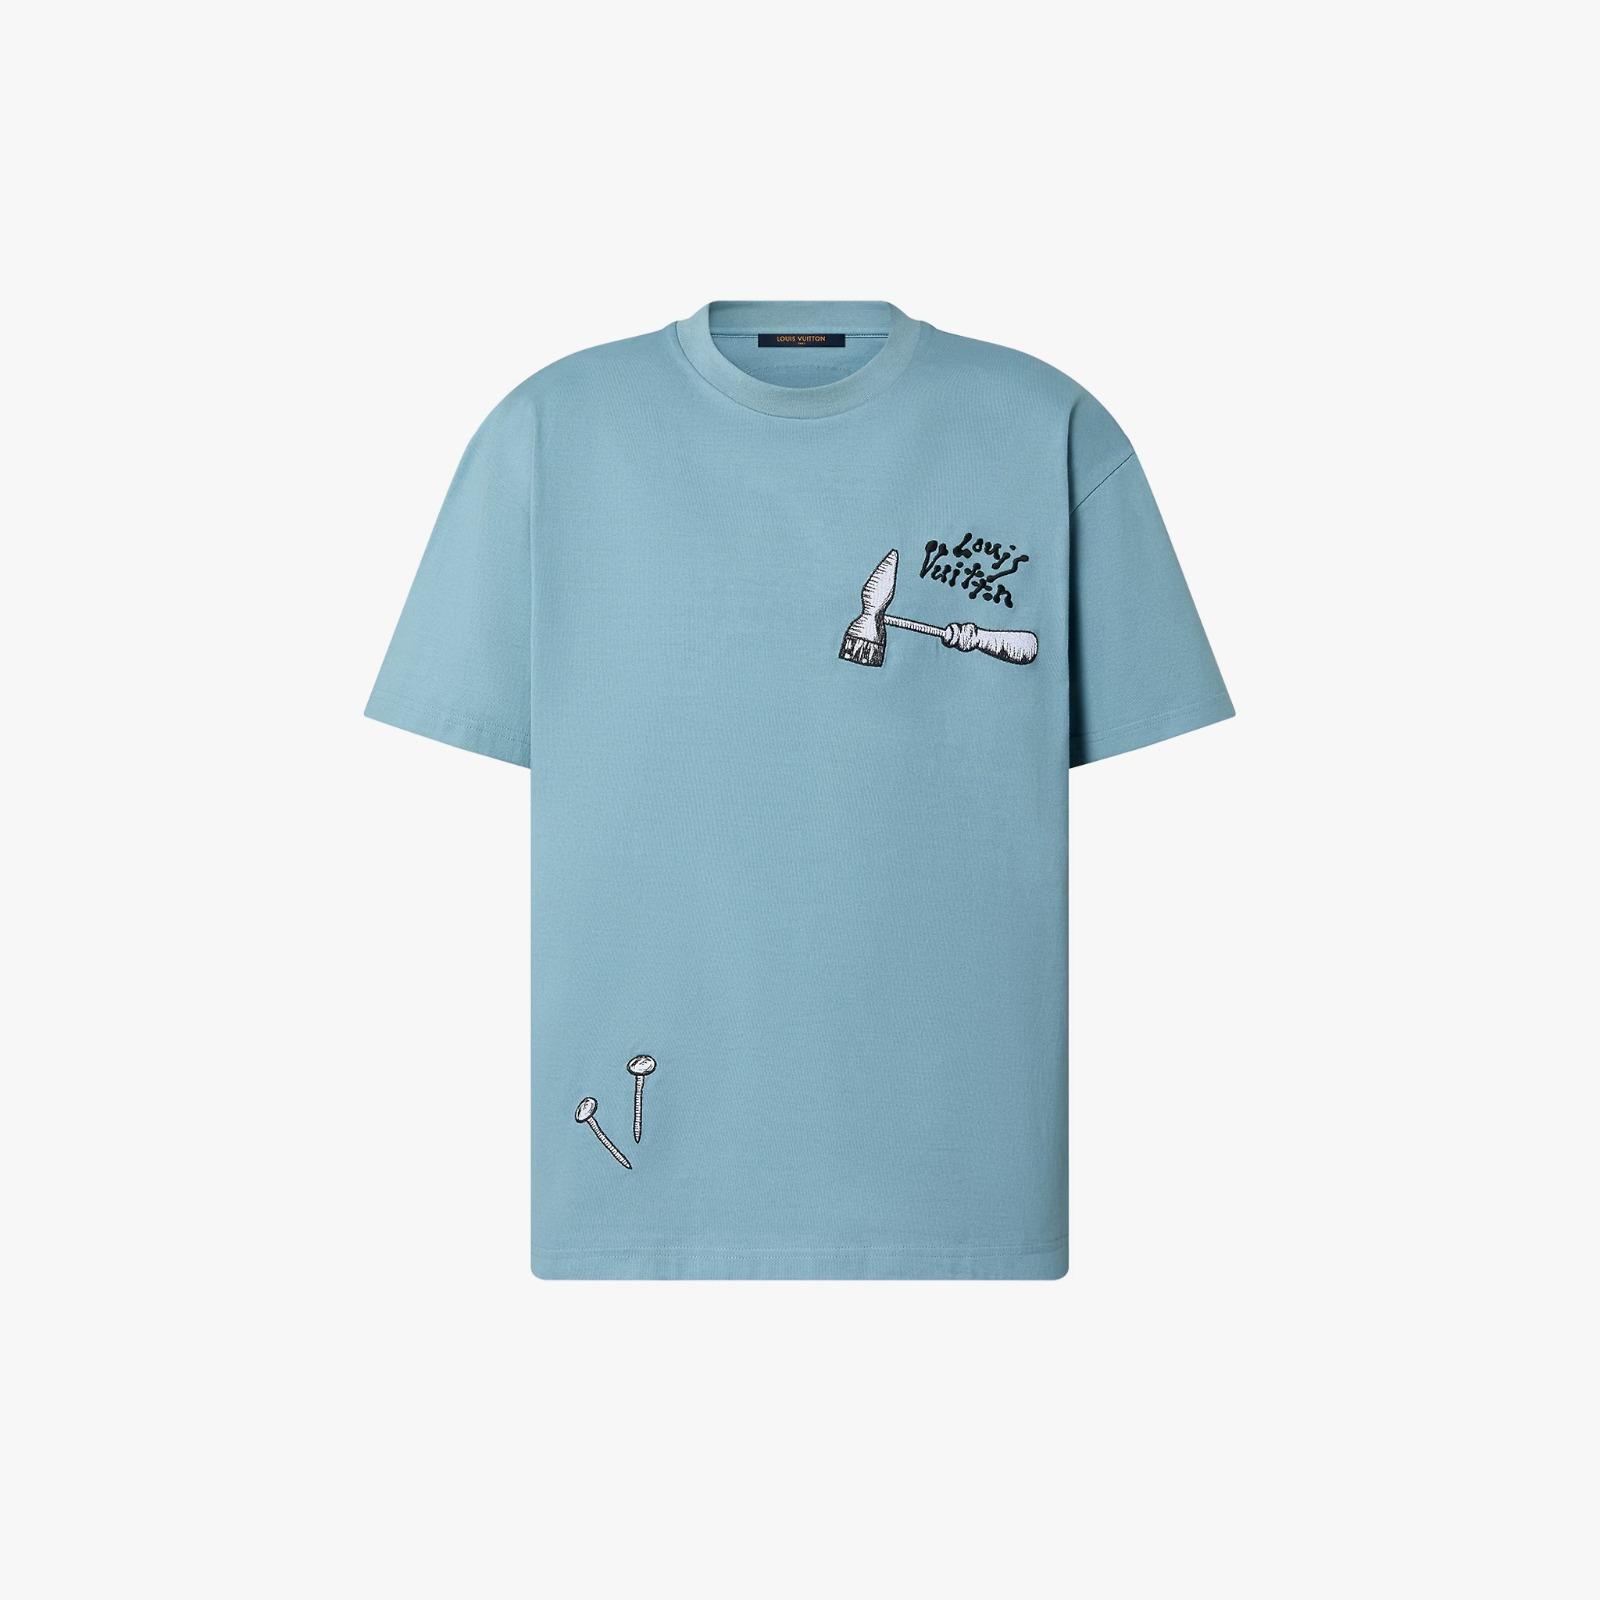 lv-multi-tools-embroidered-t-shirt-6883_16845016321-1000